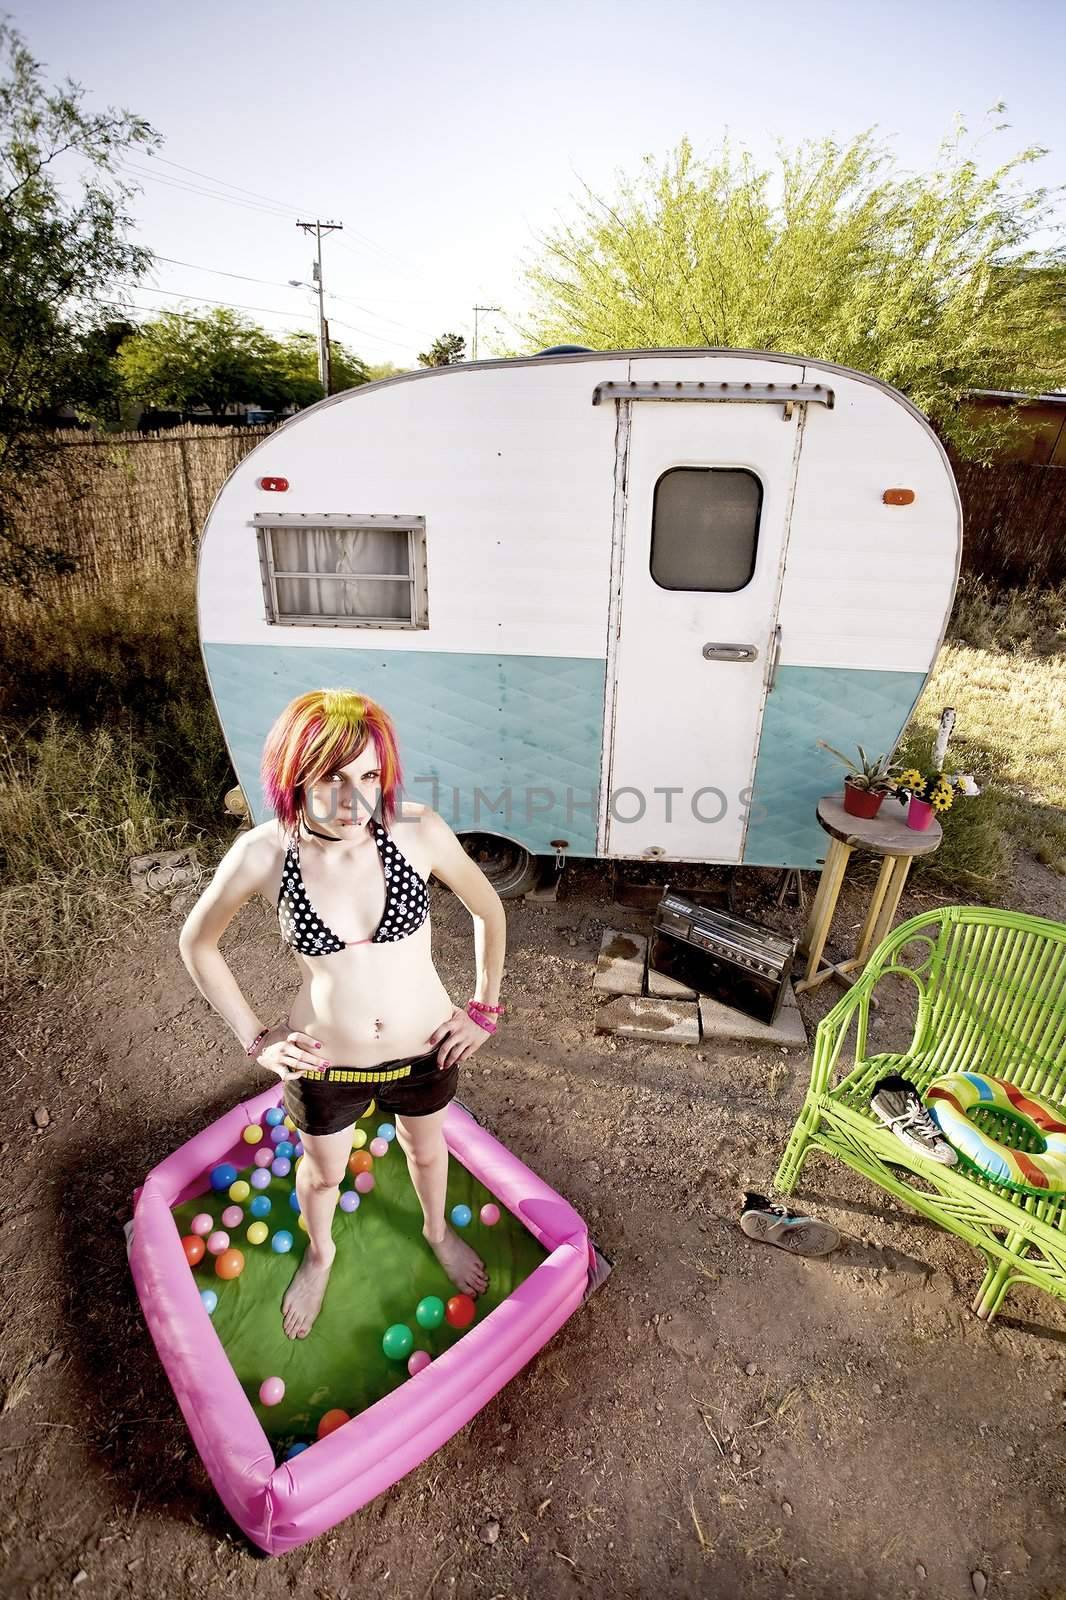 Woman standing in a play pool outside a trailer